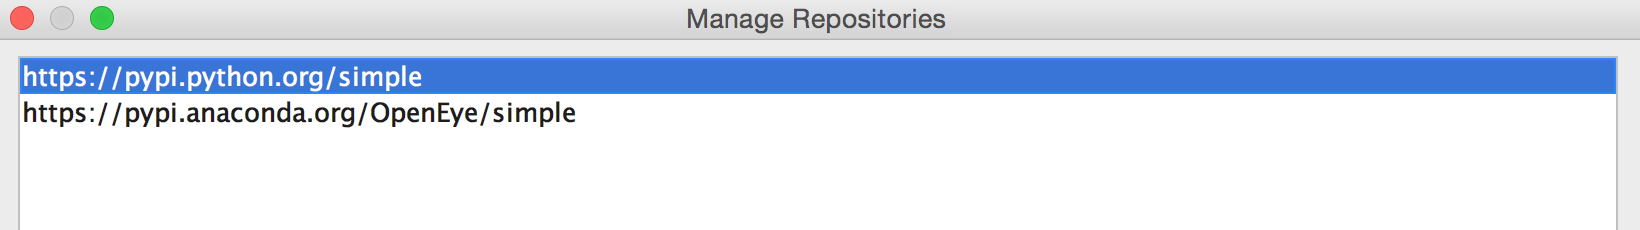 ../_images/pycharm-package-repositories.png